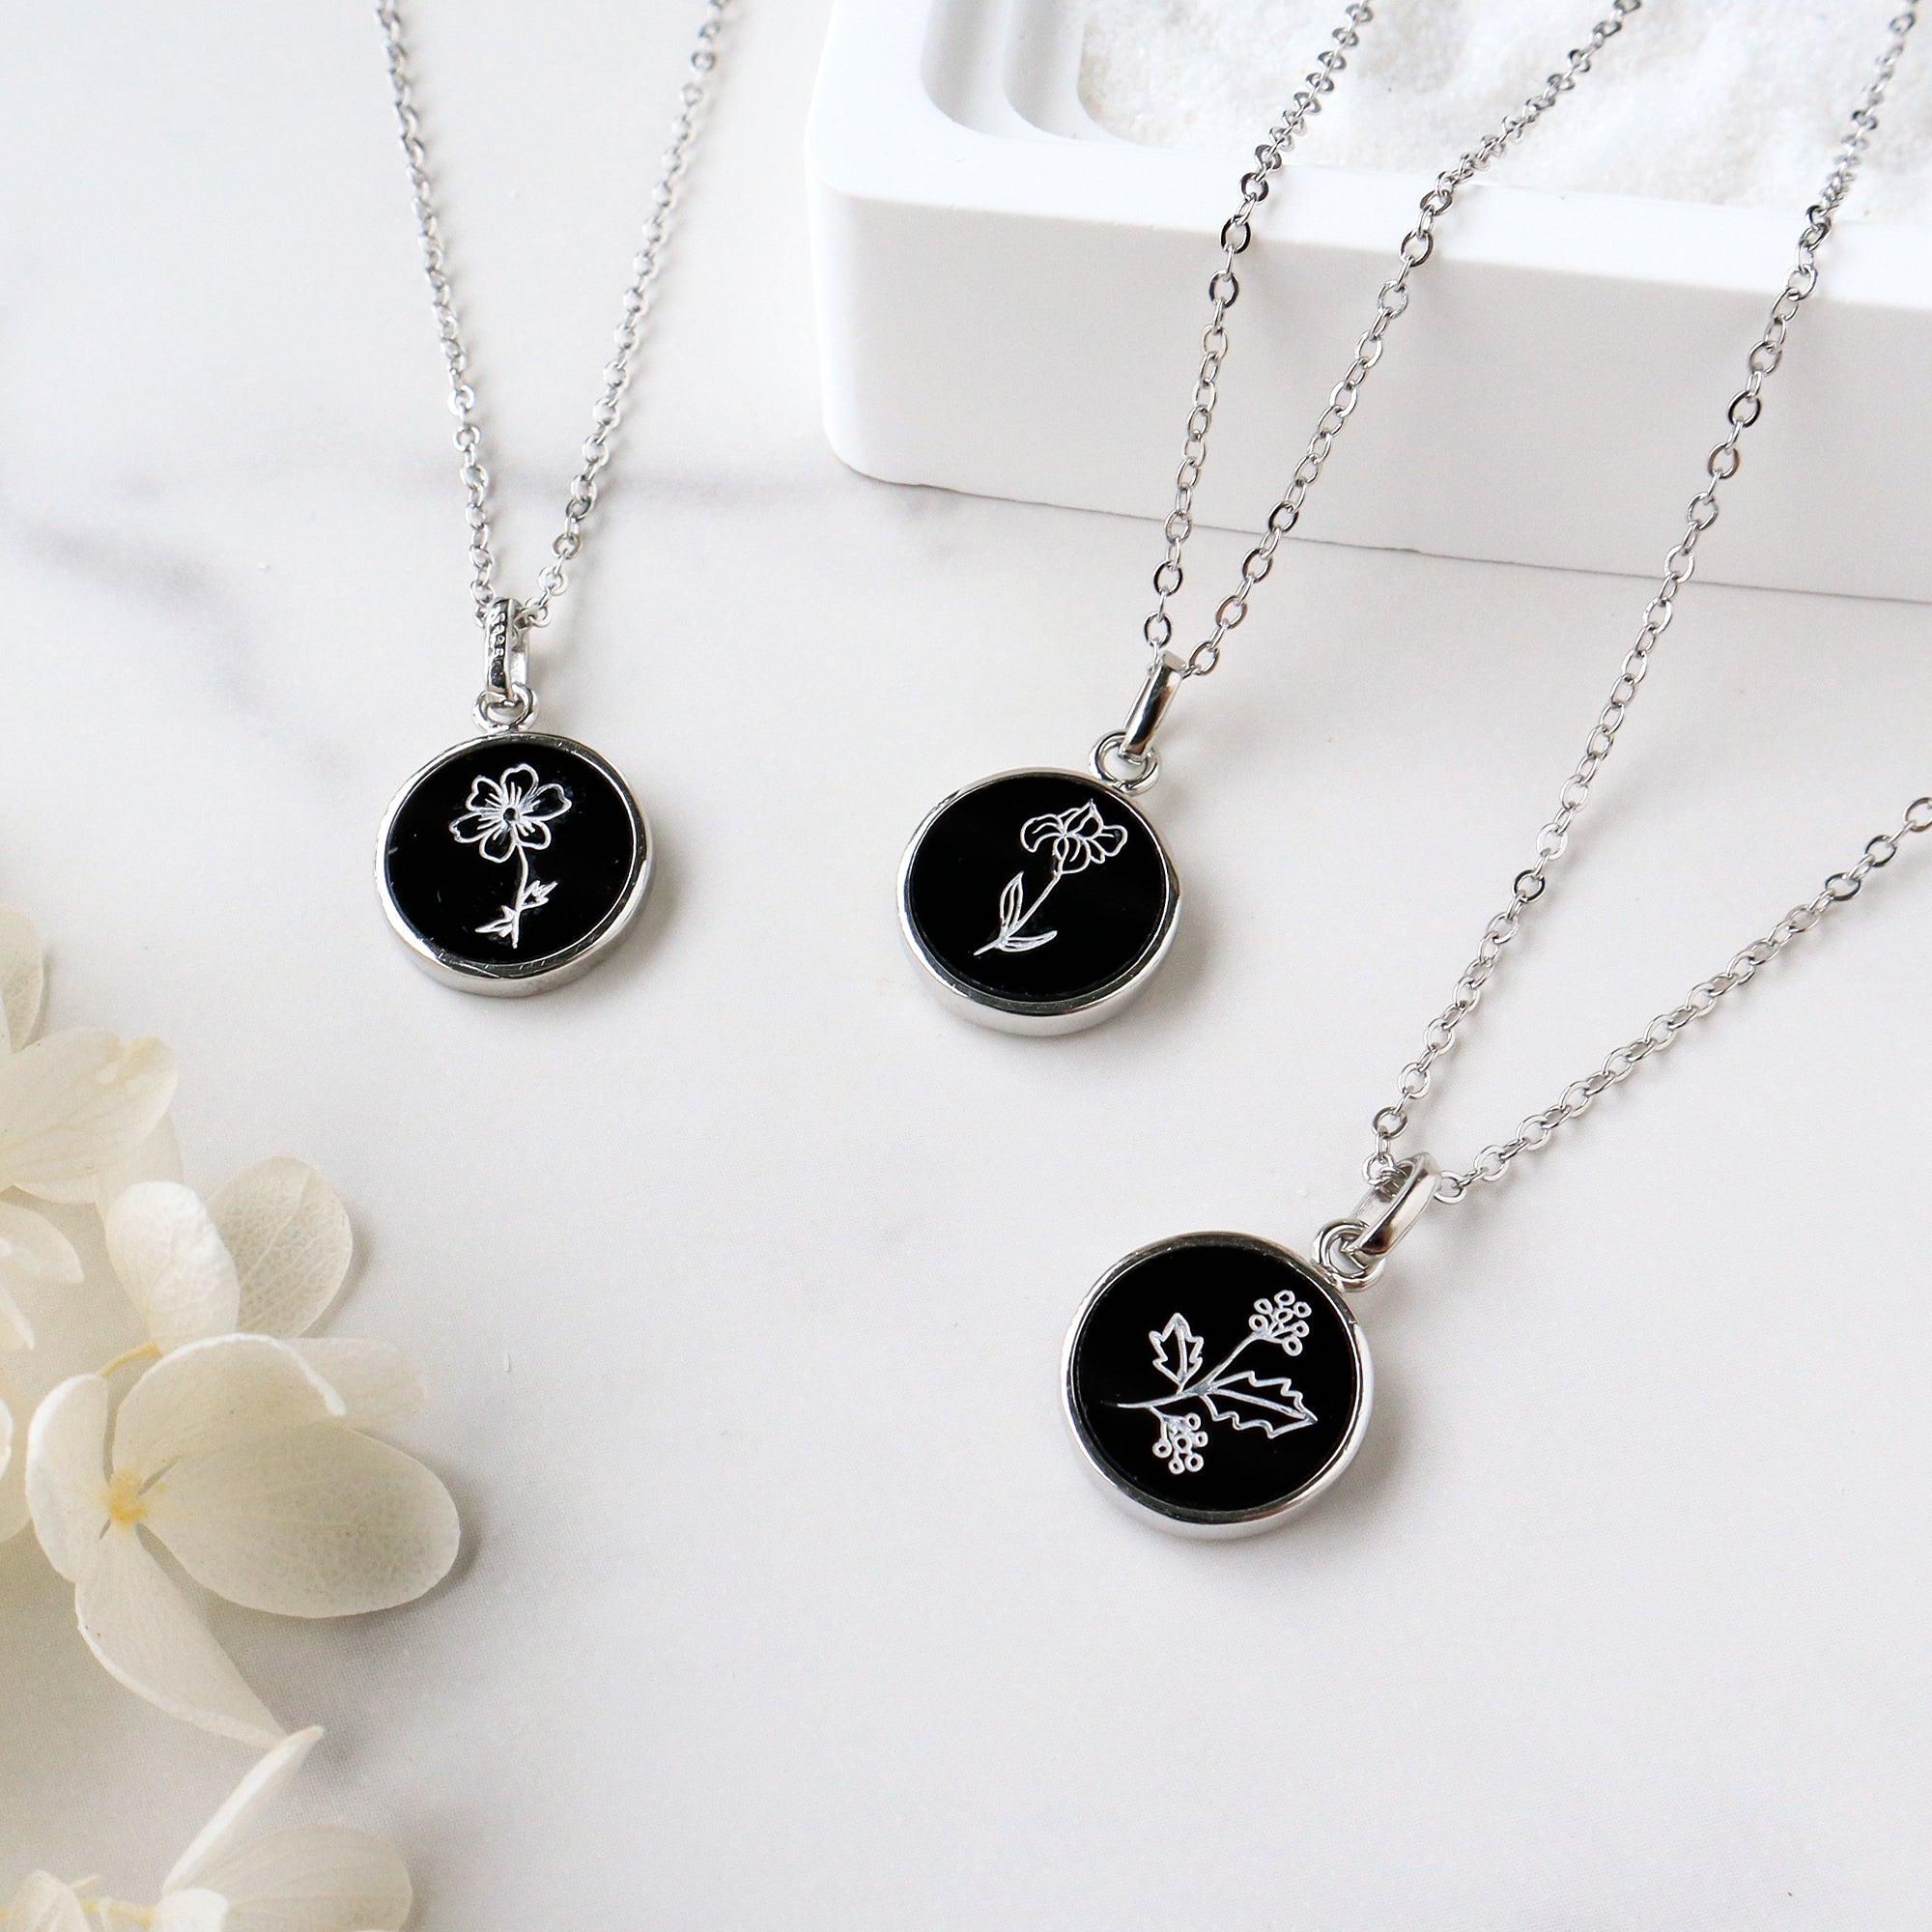 Silver Round Black Obsidian Carved Birth Month Flower Pendant Necklace, Natural Gemstone Coin Jewelry KZ014